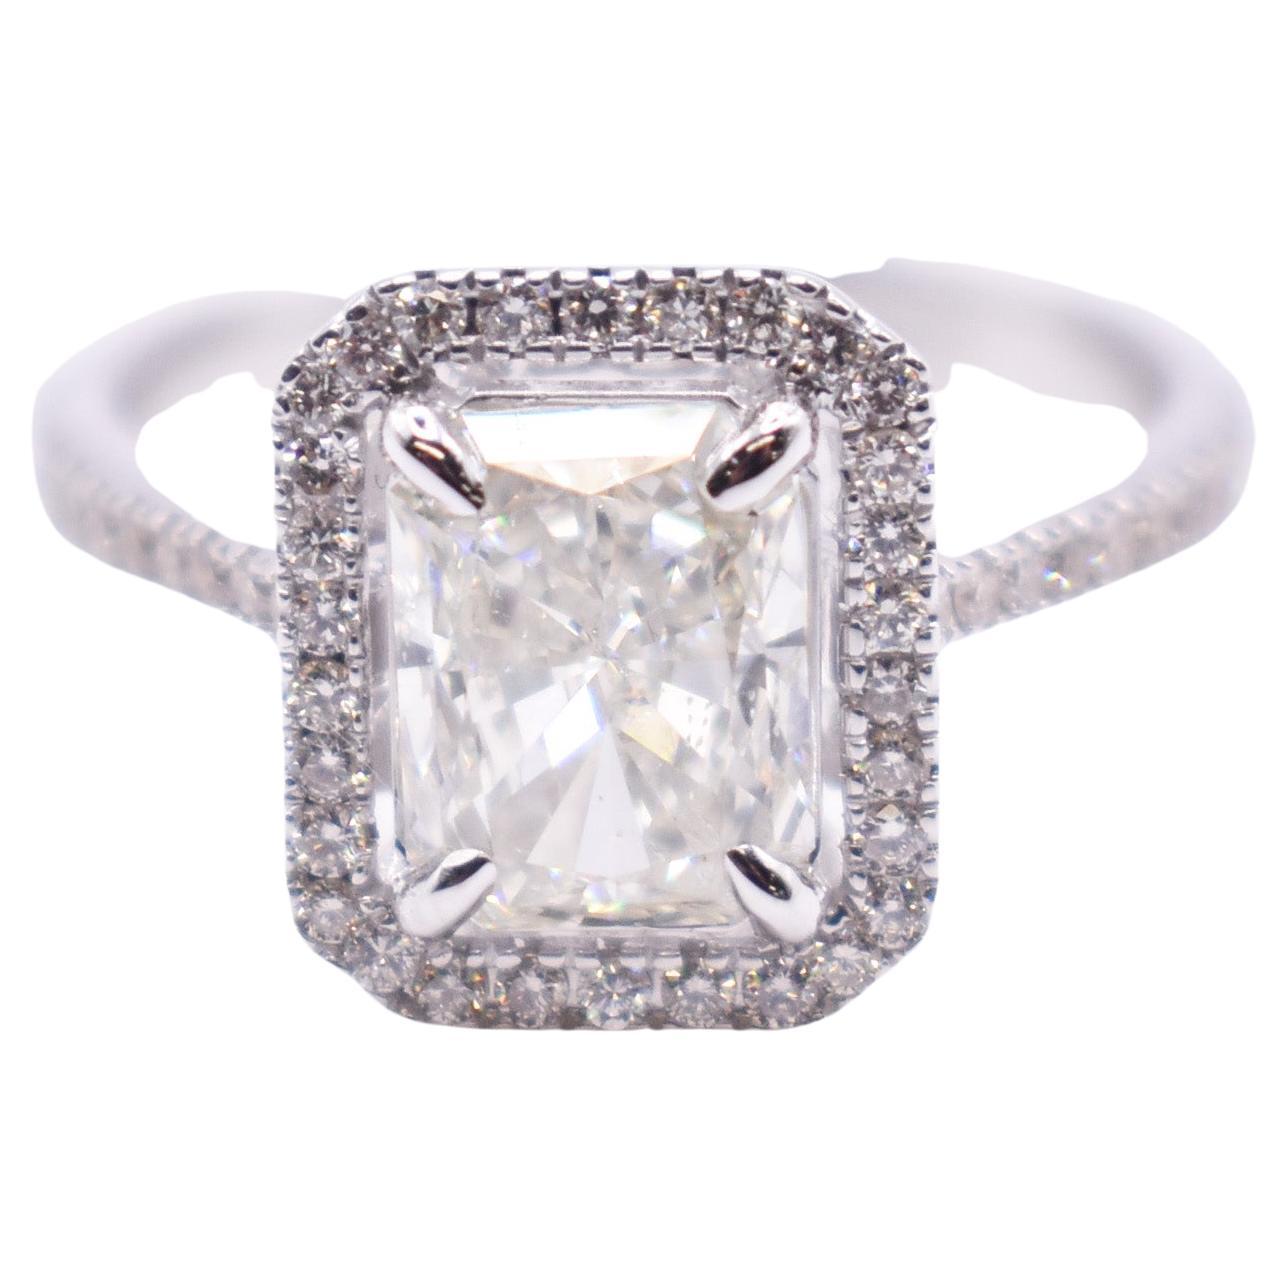 HRD Certified 1.80ct Diamond 18K White Gold Engagement Ring